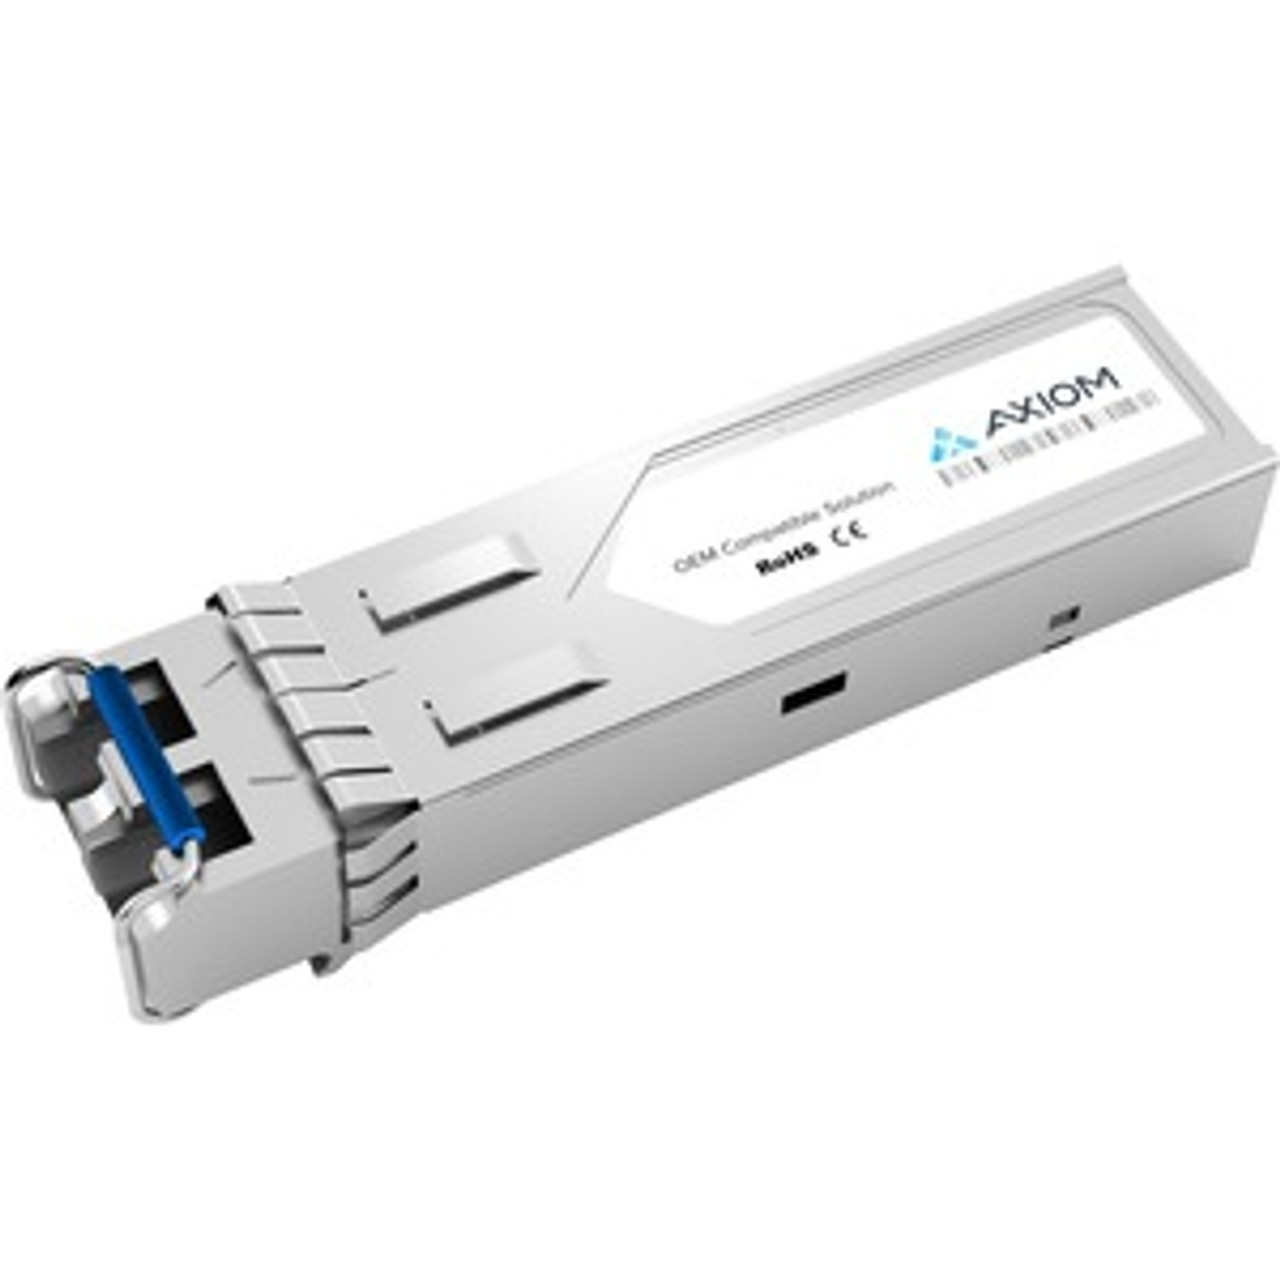 SFP-LX-DS-ACC Accortec 1Gbps 1000Base-LX Single-mode Fiber 10km 1310nm LC Connector SFP Transceiver Module for Datacom Compatible